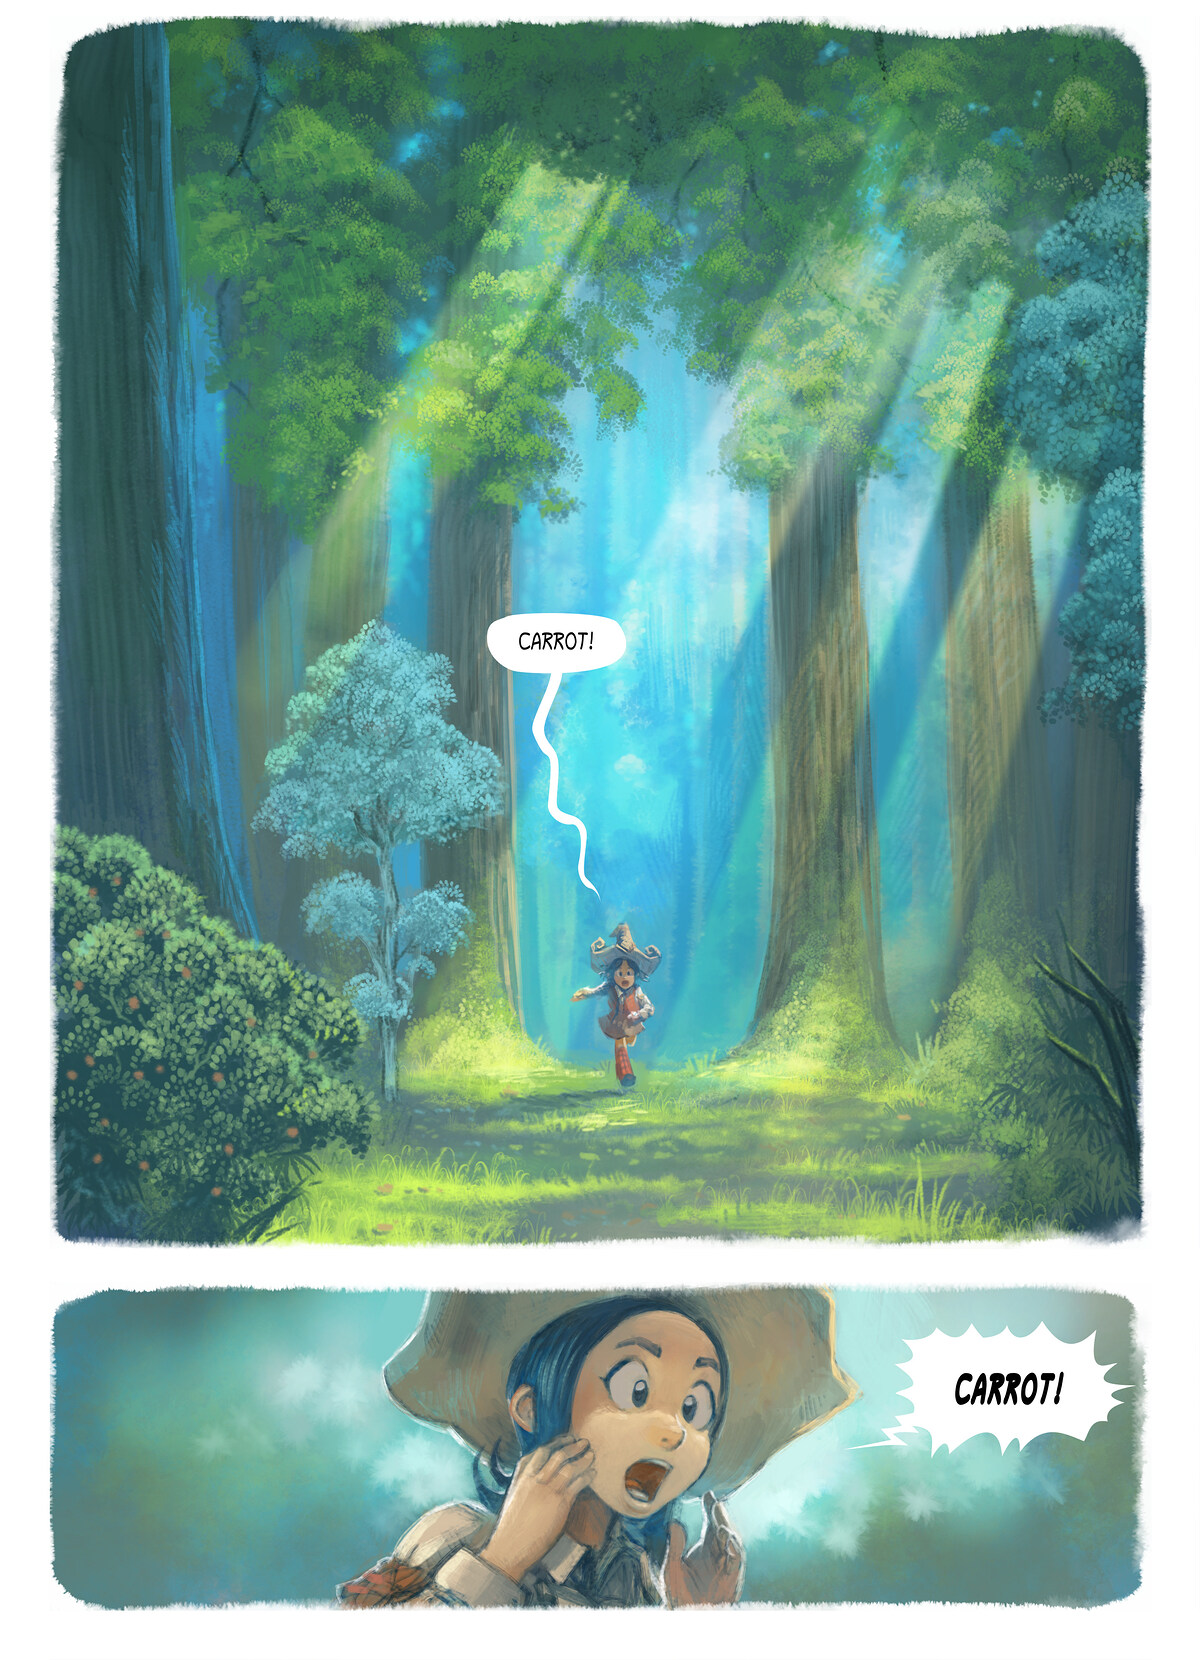 Episode 7: The Wish, Page 1